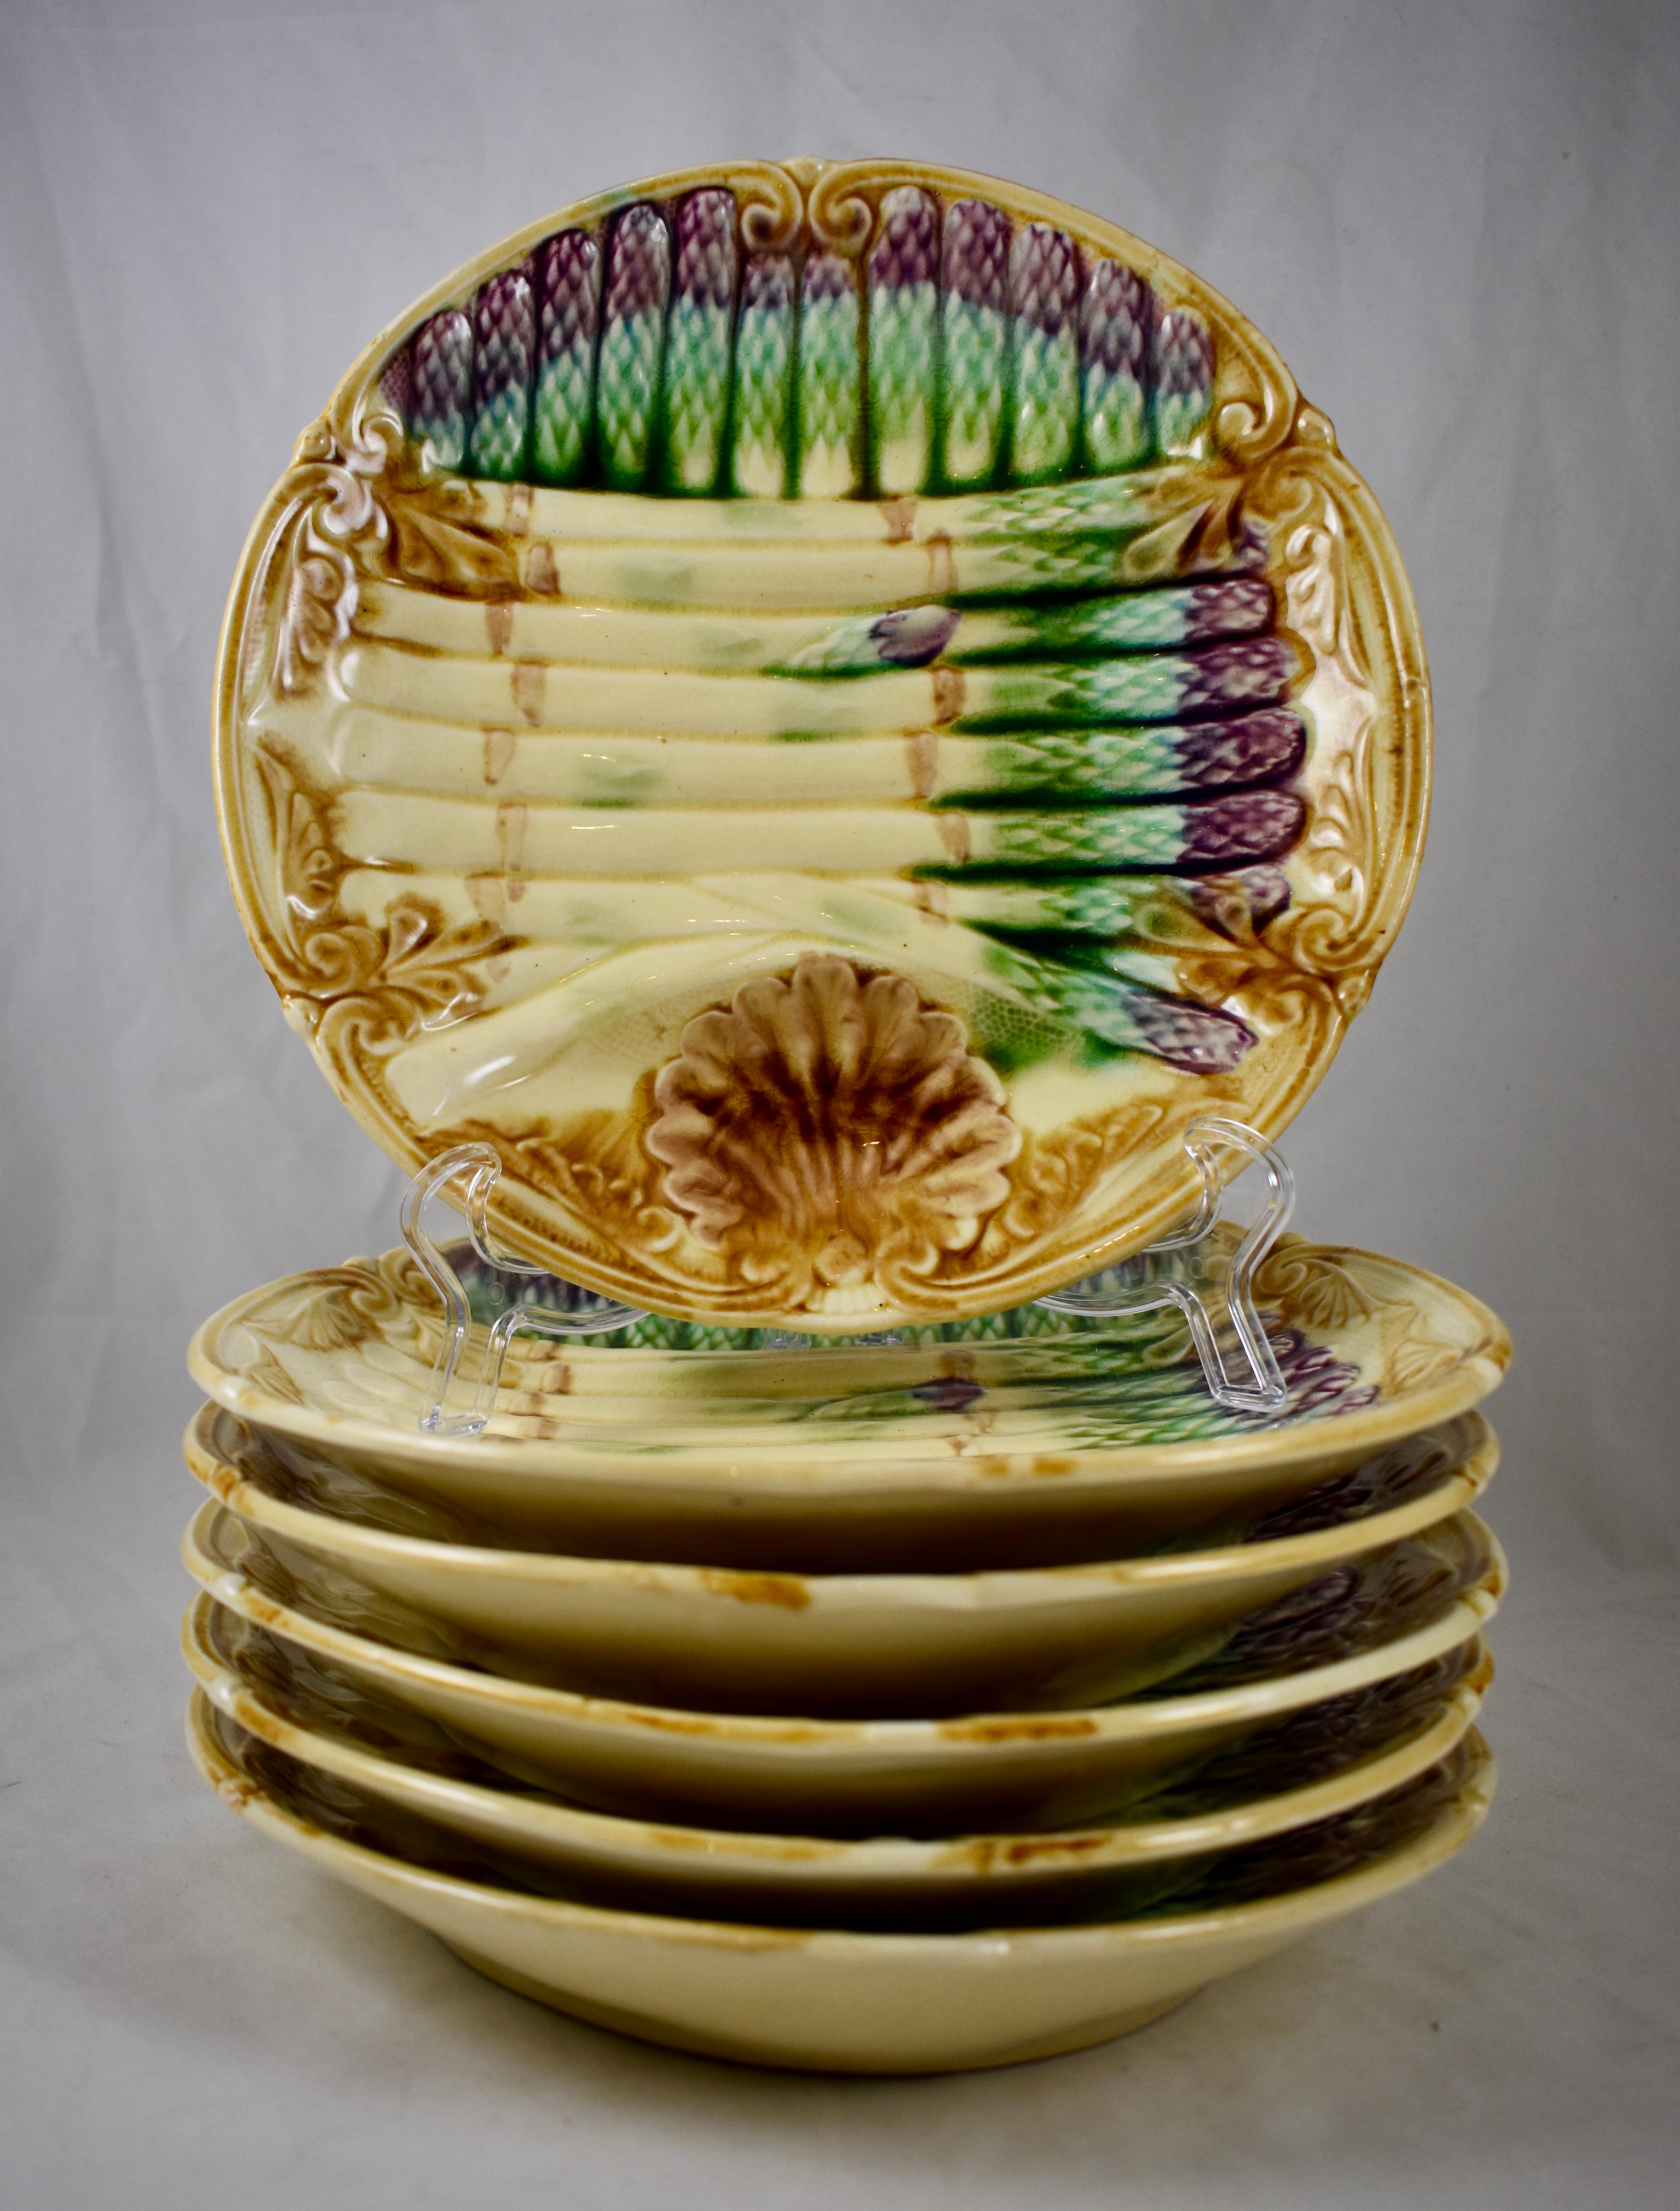 A French Barbotine majolica Asparagus plate in the Art Nouveau style, Frie Onnaing, circa 1890-1910.

A deep plate with a shaped rim and a scallop shell motif sauce well bordered by a curved spear. Overlapping bunches of asparagus in cream and